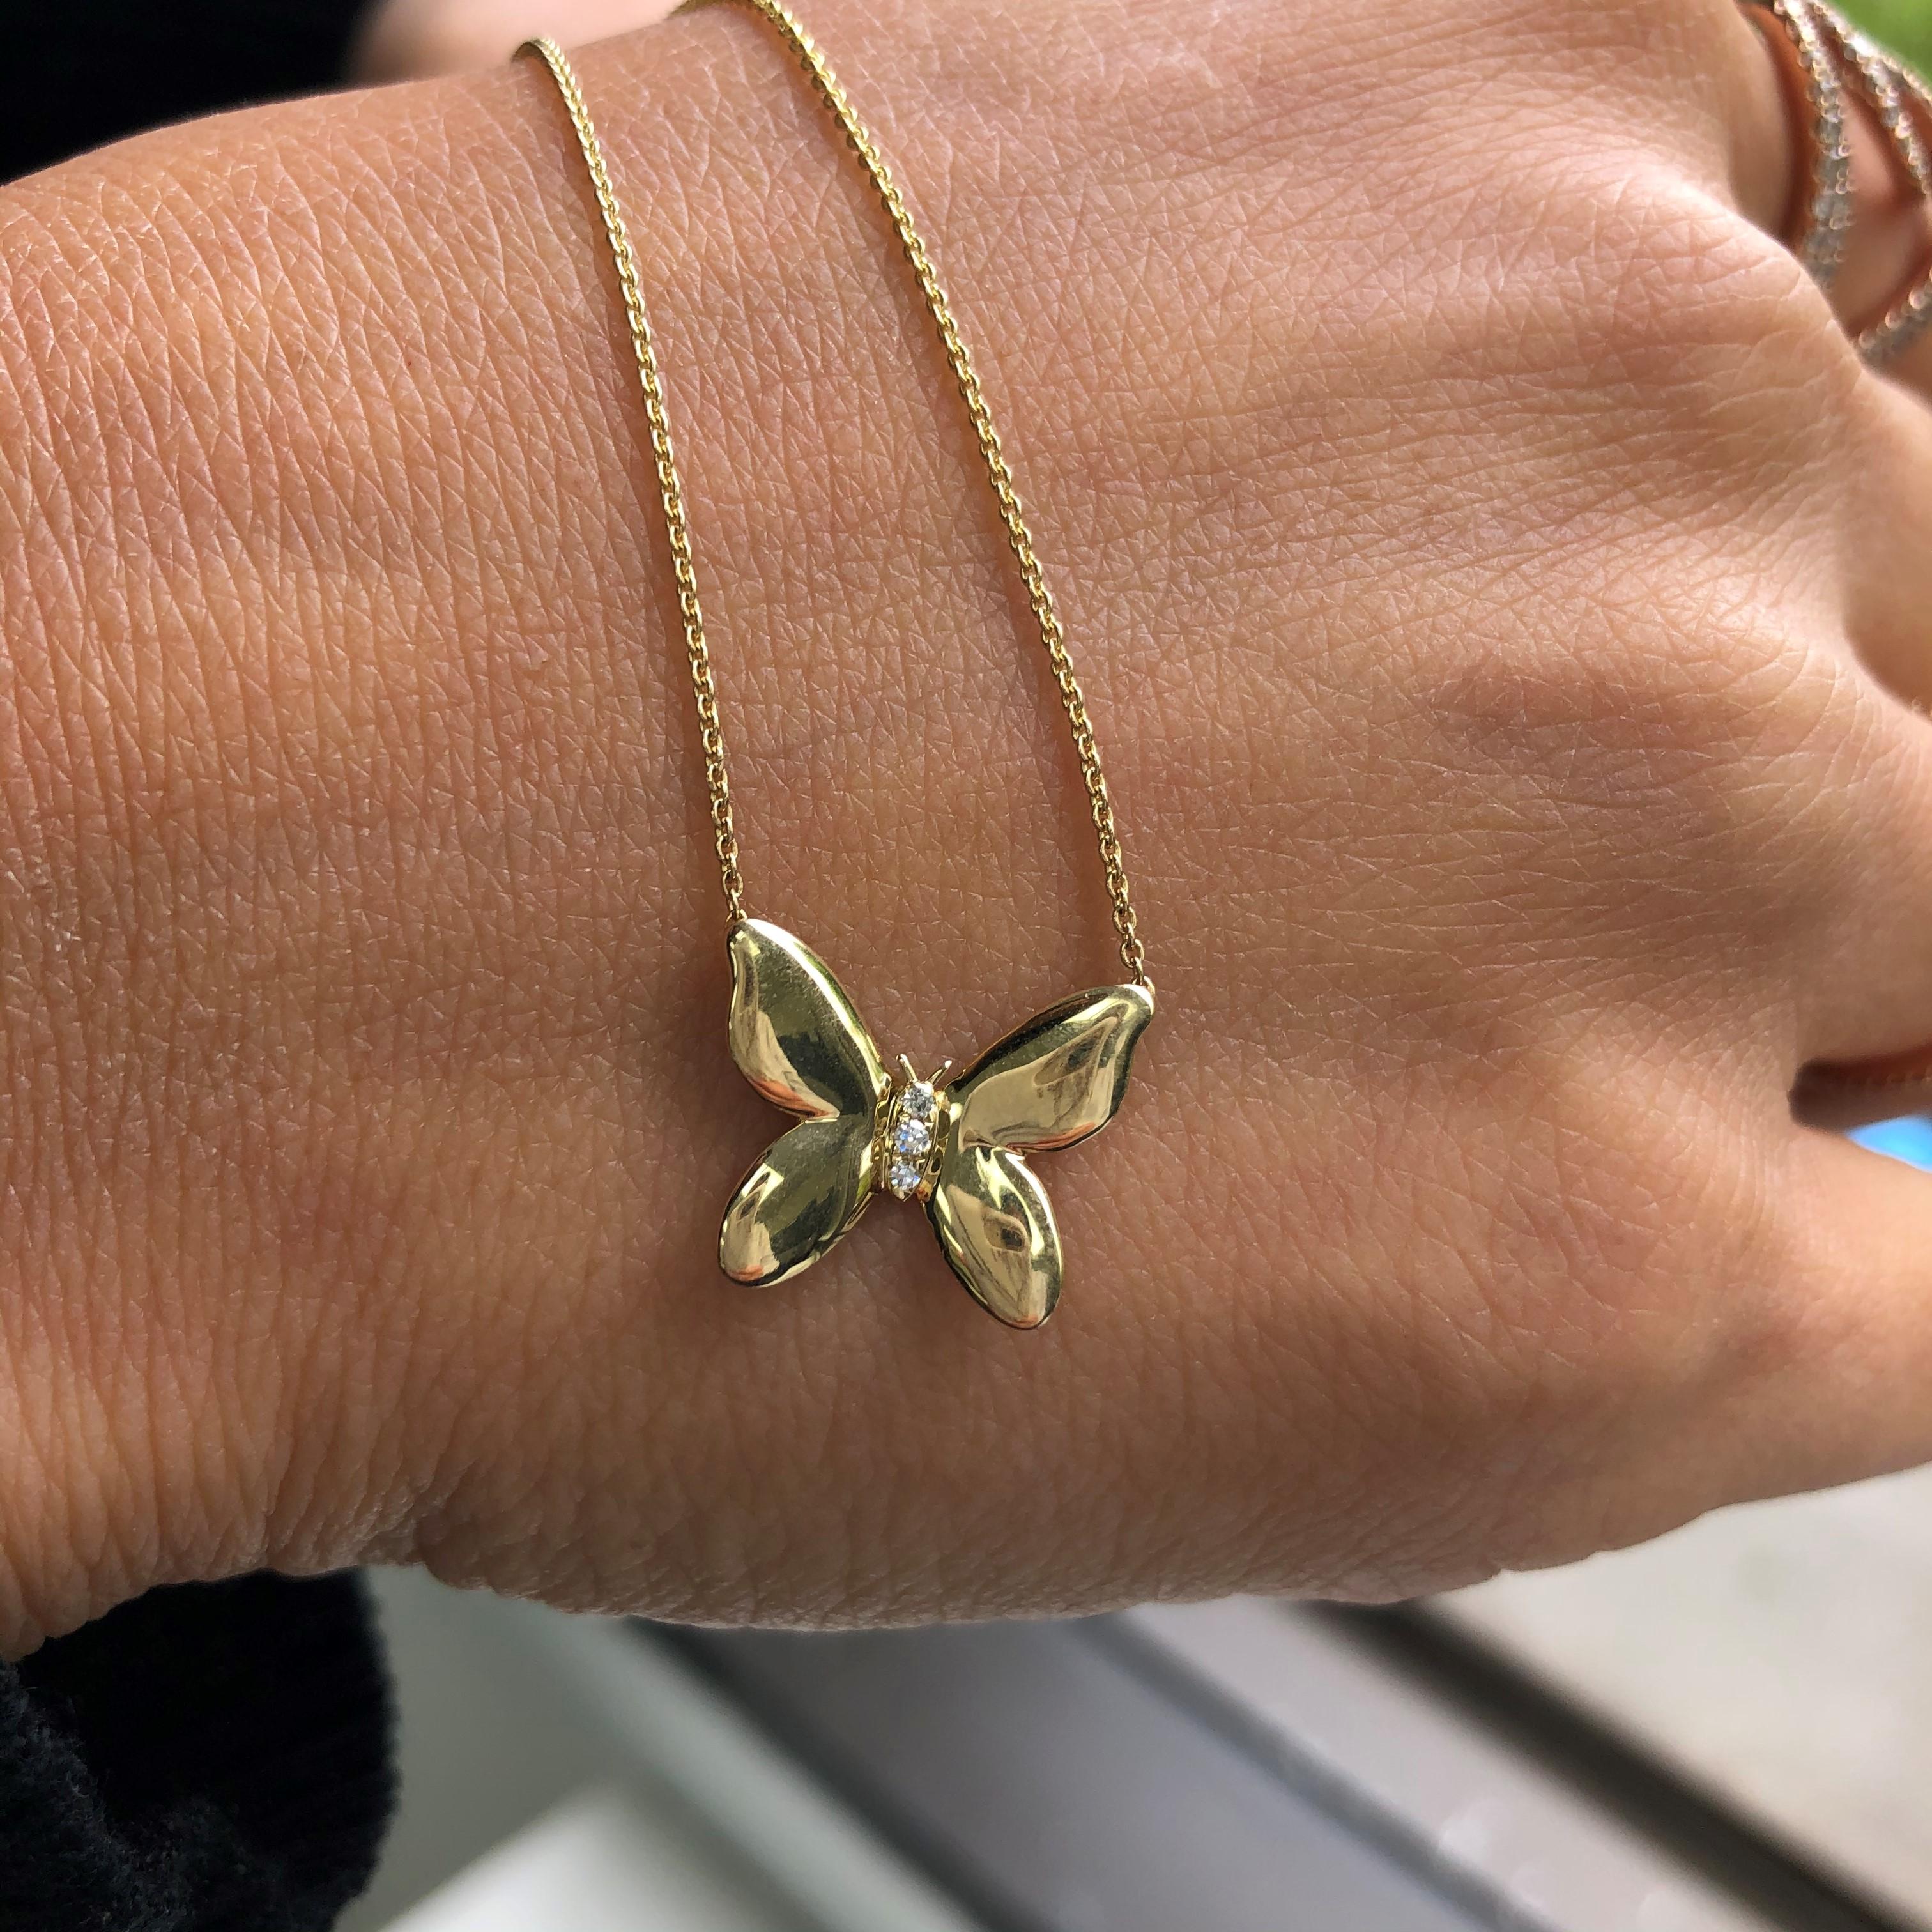 This Beautiful Butterfly Pendant is crafted of 14K Yellow Gold and features 0.02cts of round Diamonds. Adjustable Chain 16-18'' inches. Gorgeous for every day wear!
-14K Yellow Gold
-0.02cts Diamonds
-Round Natural Diamonds
-Diamond Color